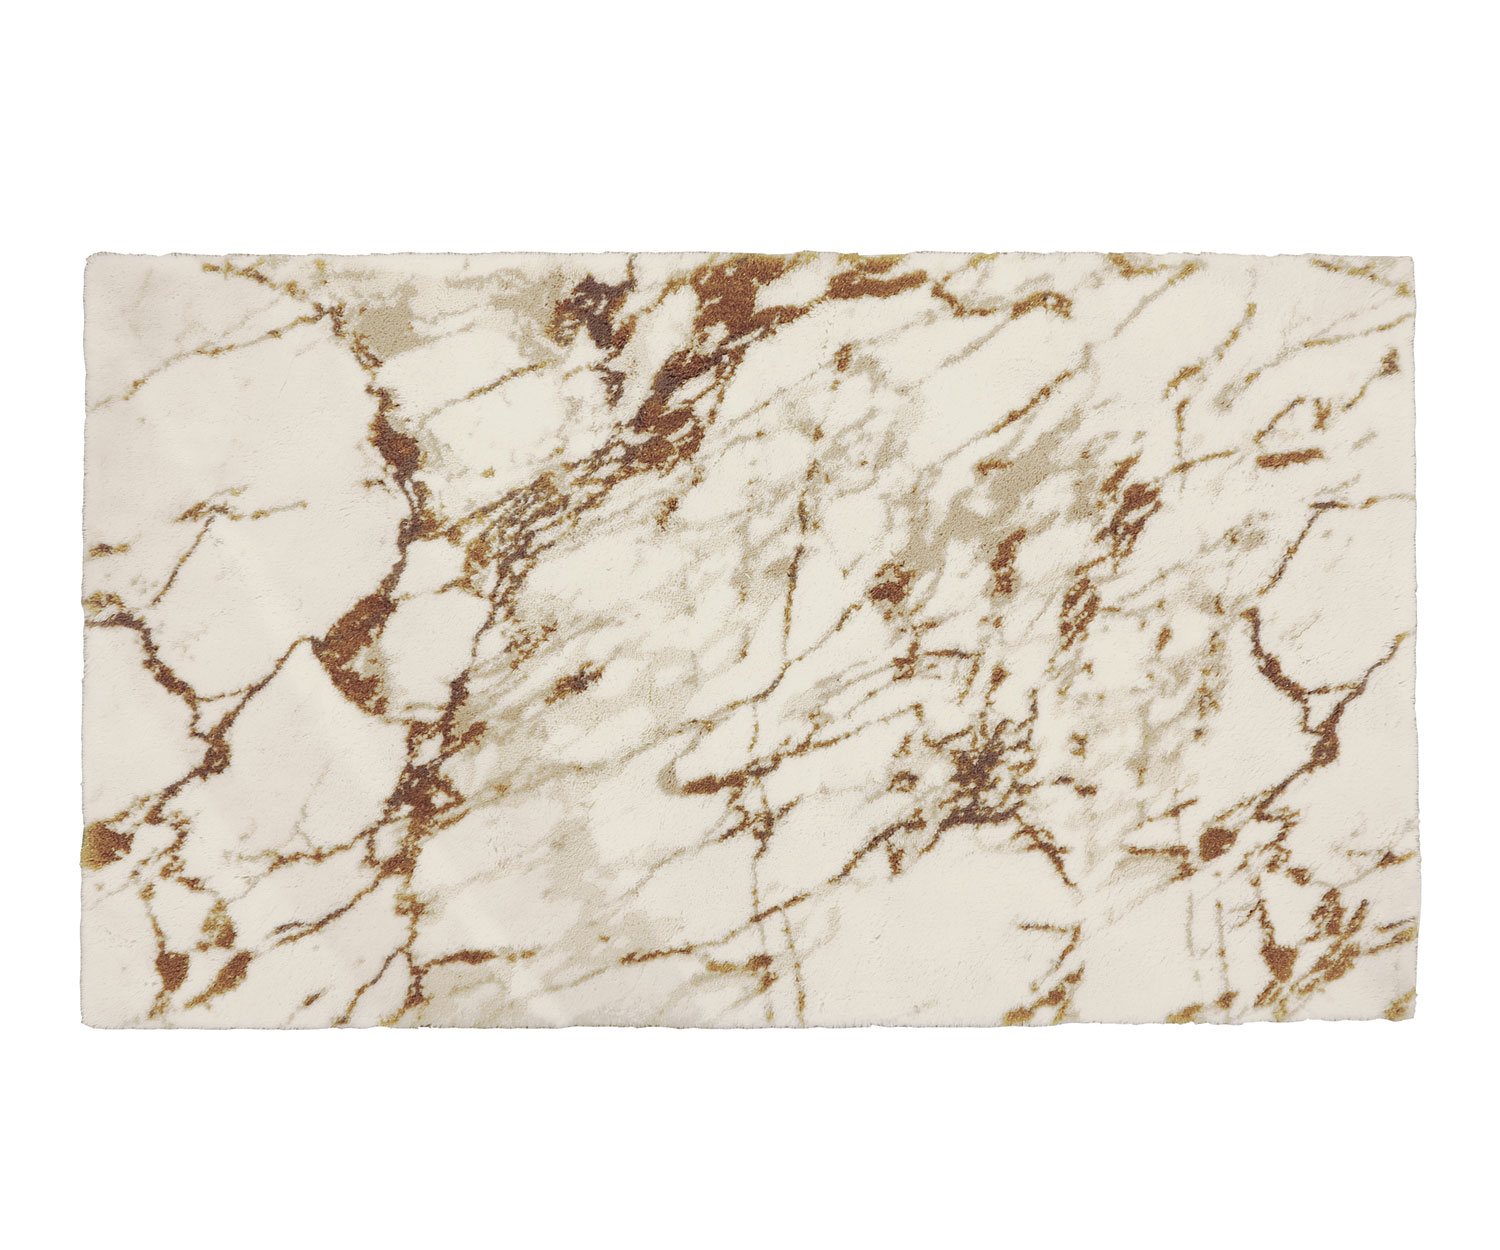 Luxury Paros Marble Bath Mat by Designer Abyss & Habidecor buy online from  the rug seller uk